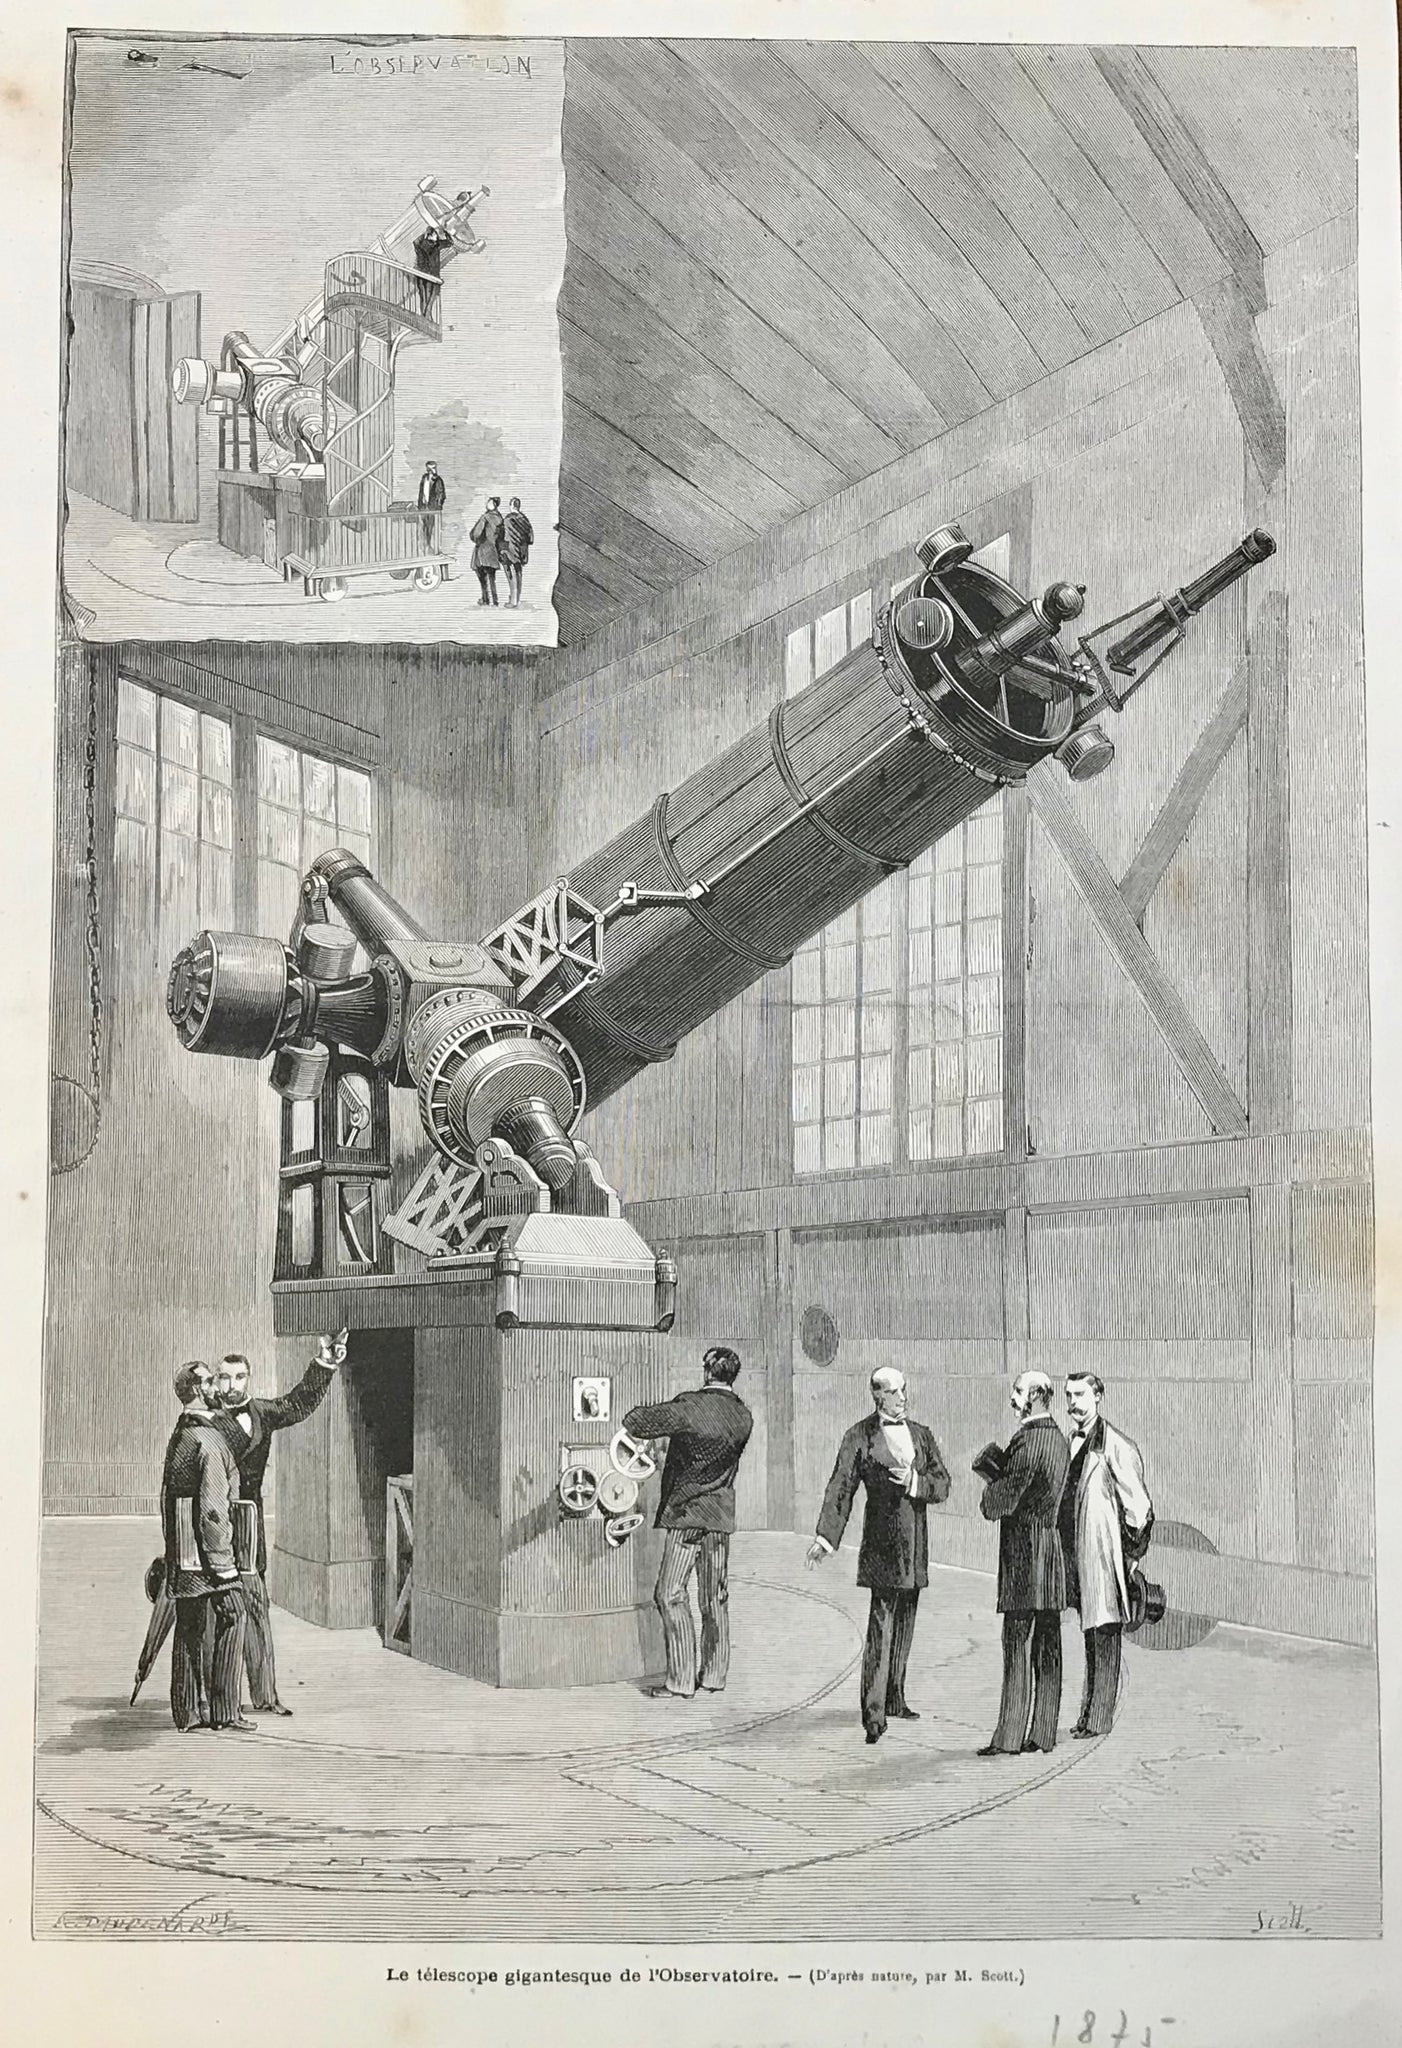 "Le telescope gigantesque de L'Observatoire"  Wood engraving after Scott published 1875. Reverse side is printed with unrelated text.  Minor spotting in margins.